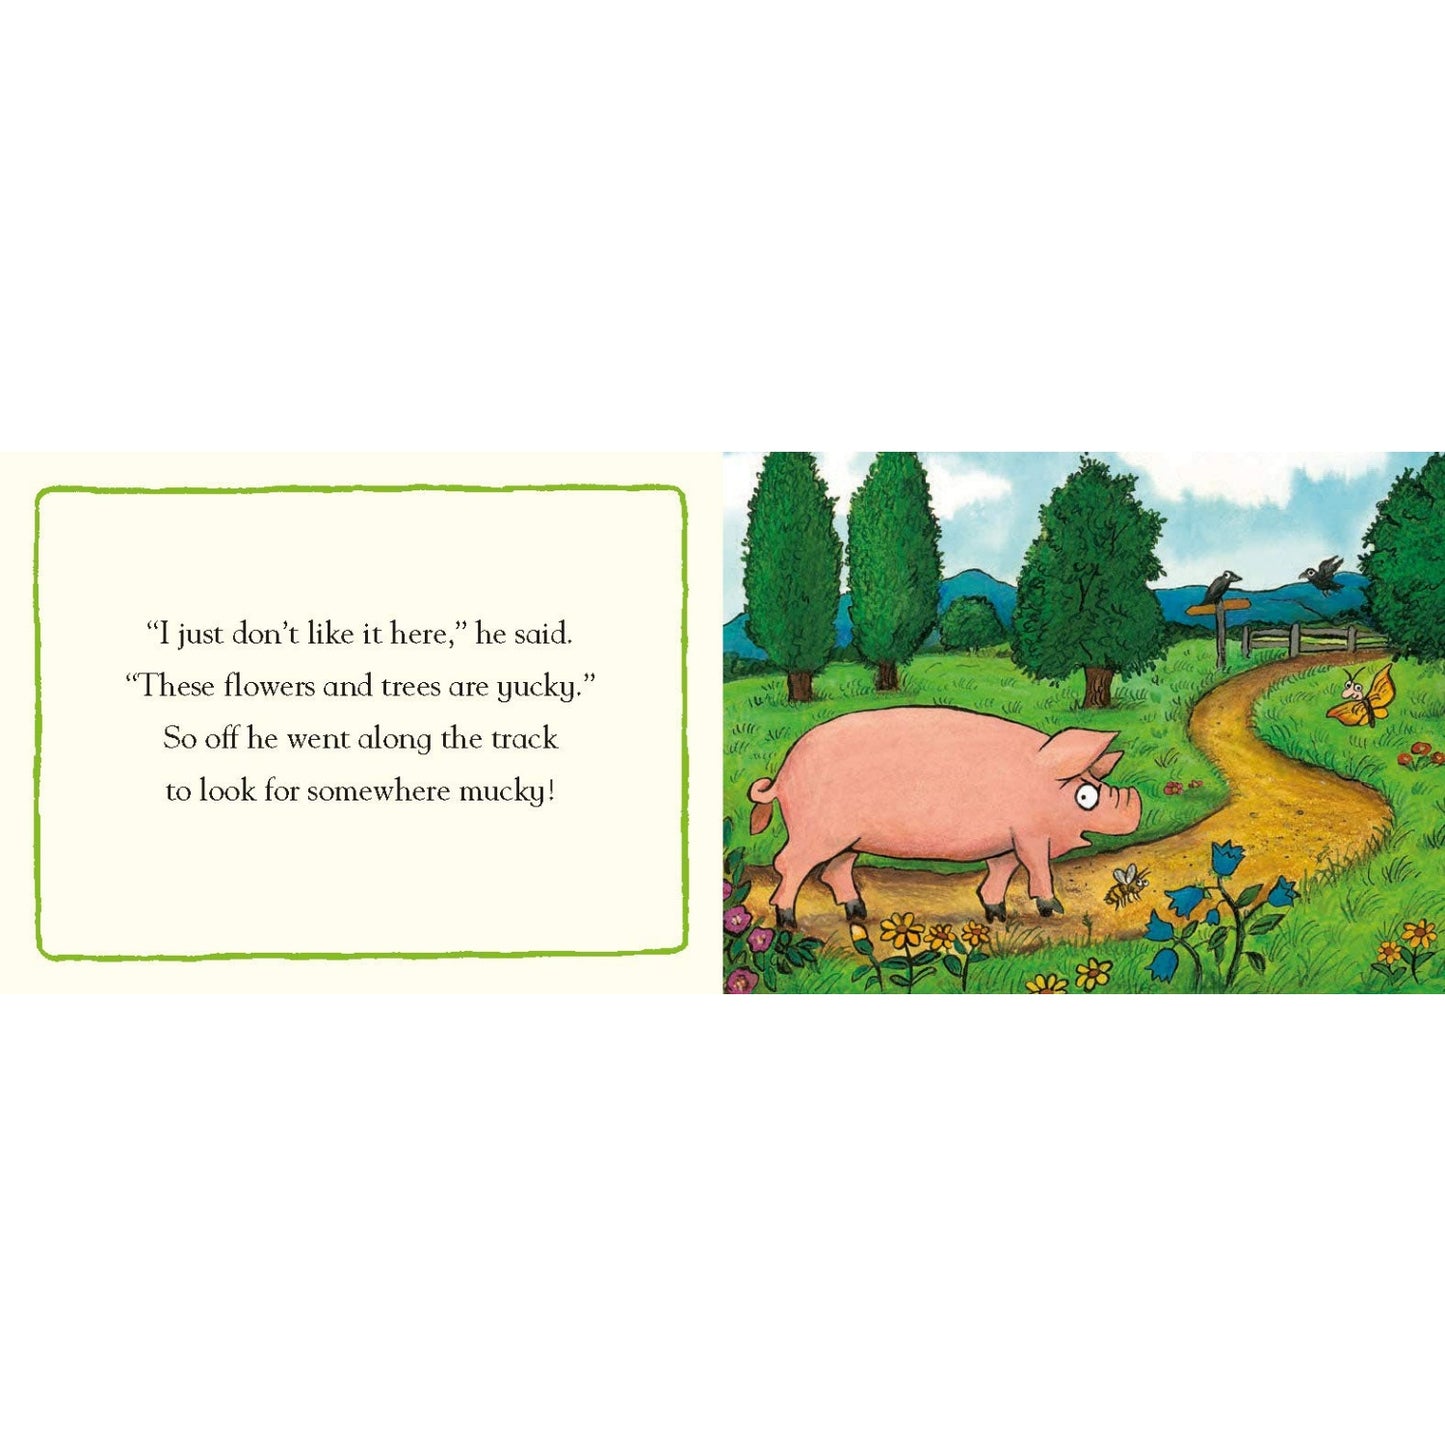 Portly Pig - Farmyard Friends | Board Book for Babies & Toddlers